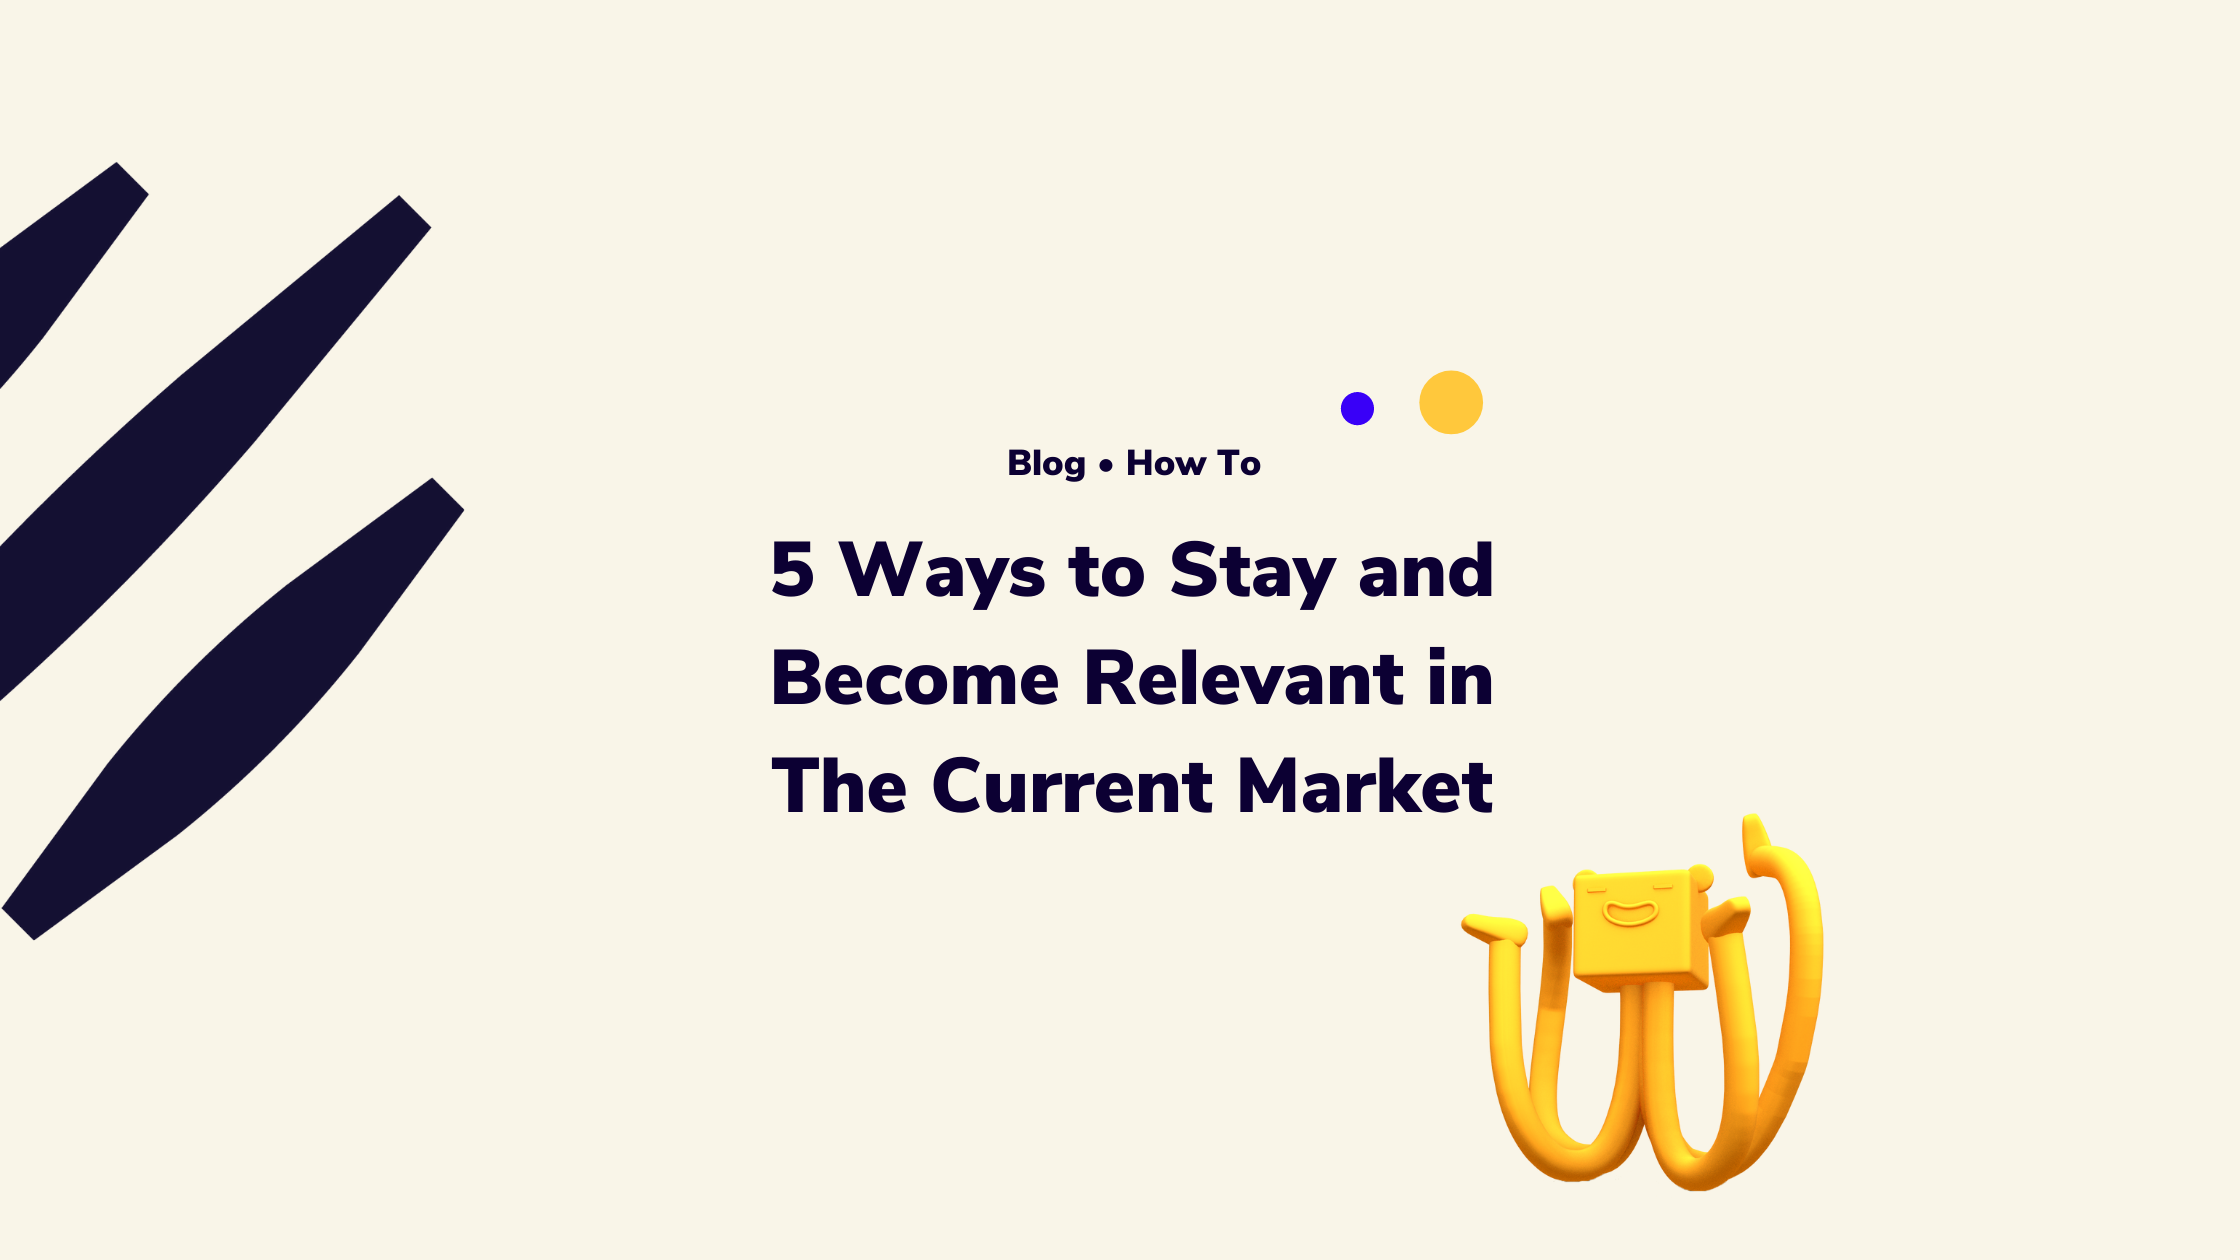 5 ways to stay and become relevant in the current market